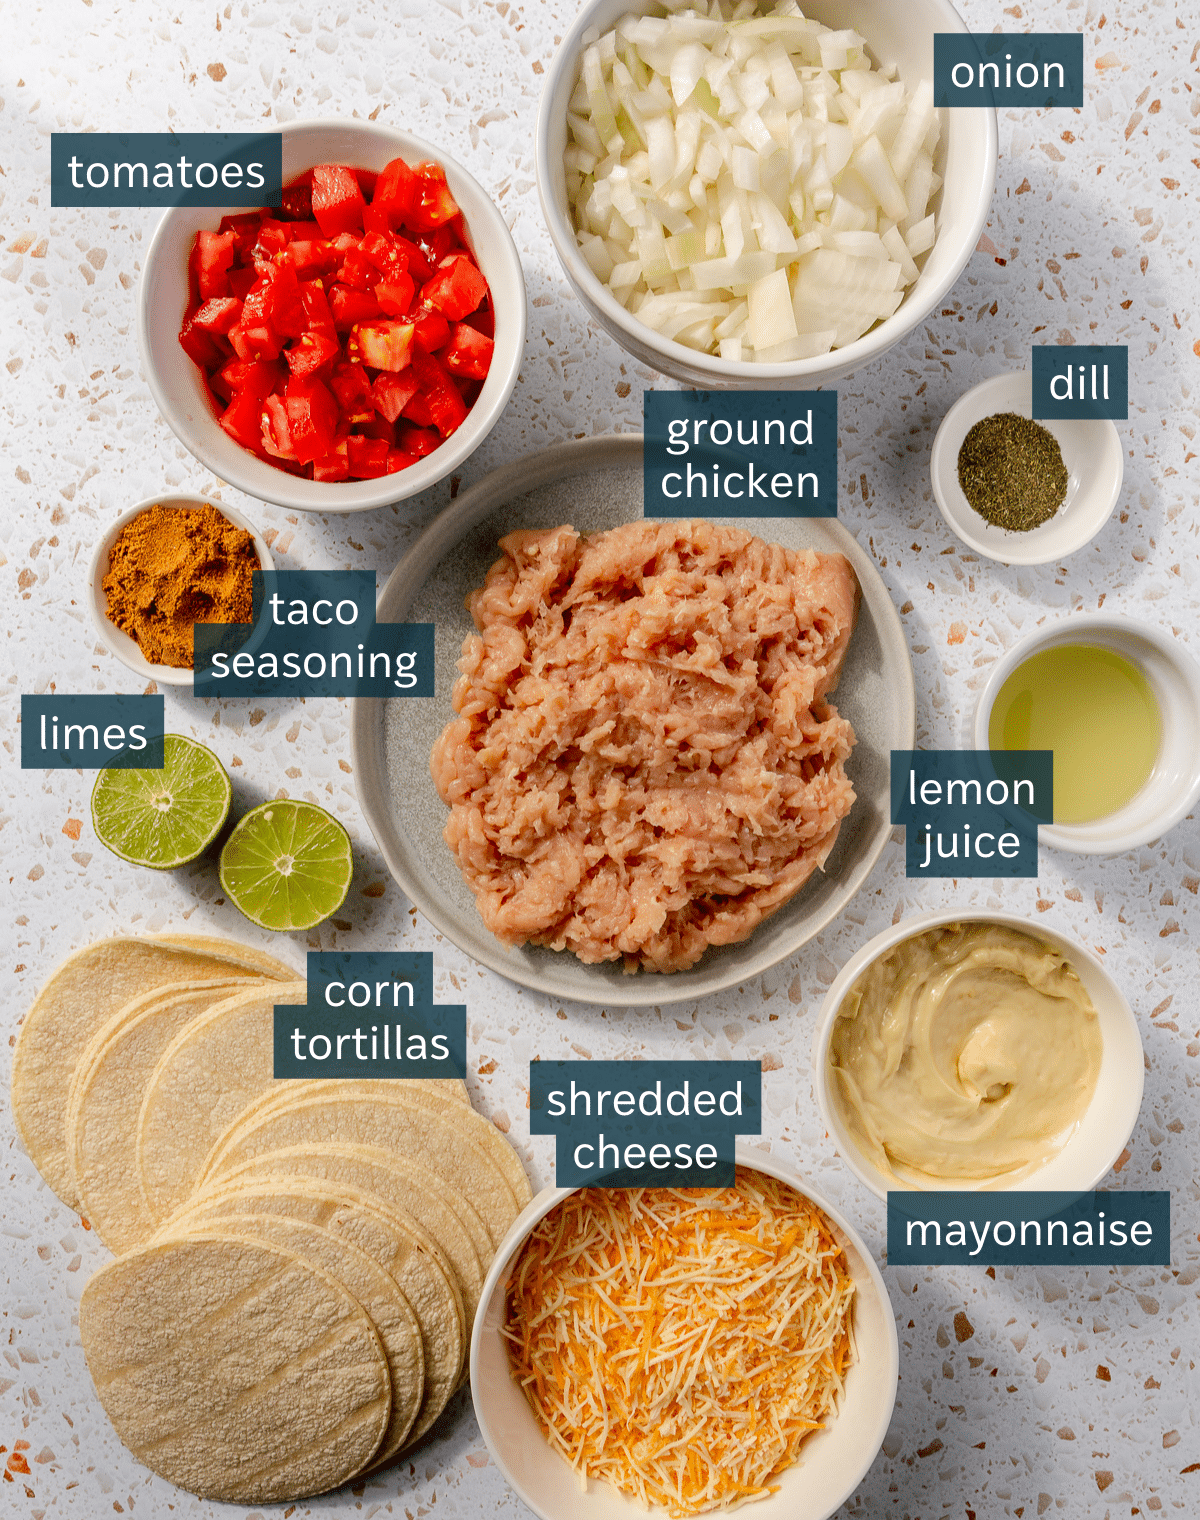 Ingredients for ground chicken tacos sit in a variety of bowls on a white speckled countertop.